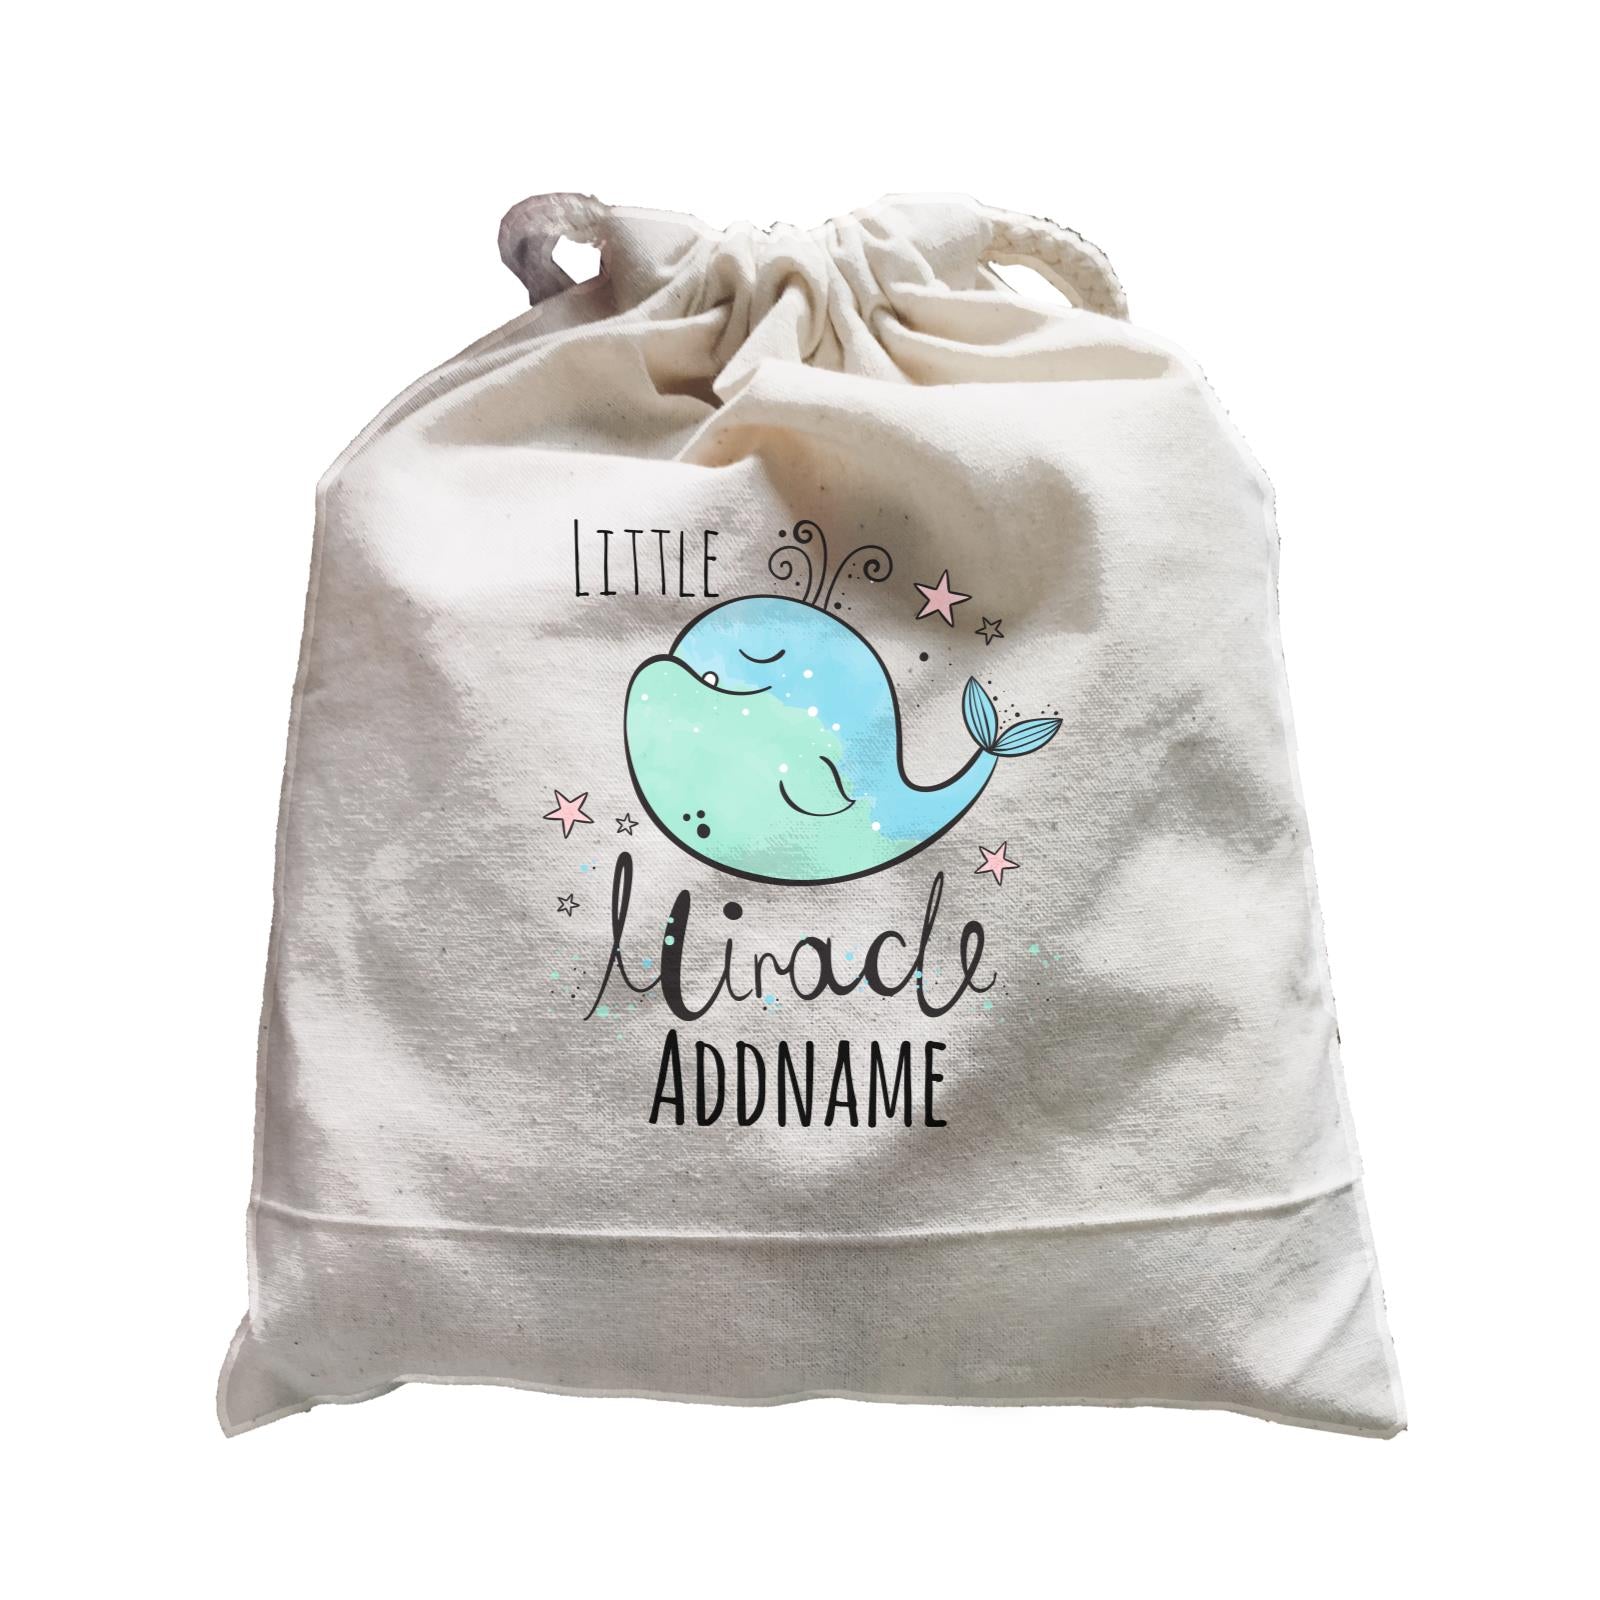 Drawn Ocean Elements Little Miracle Whale Addname Satchel